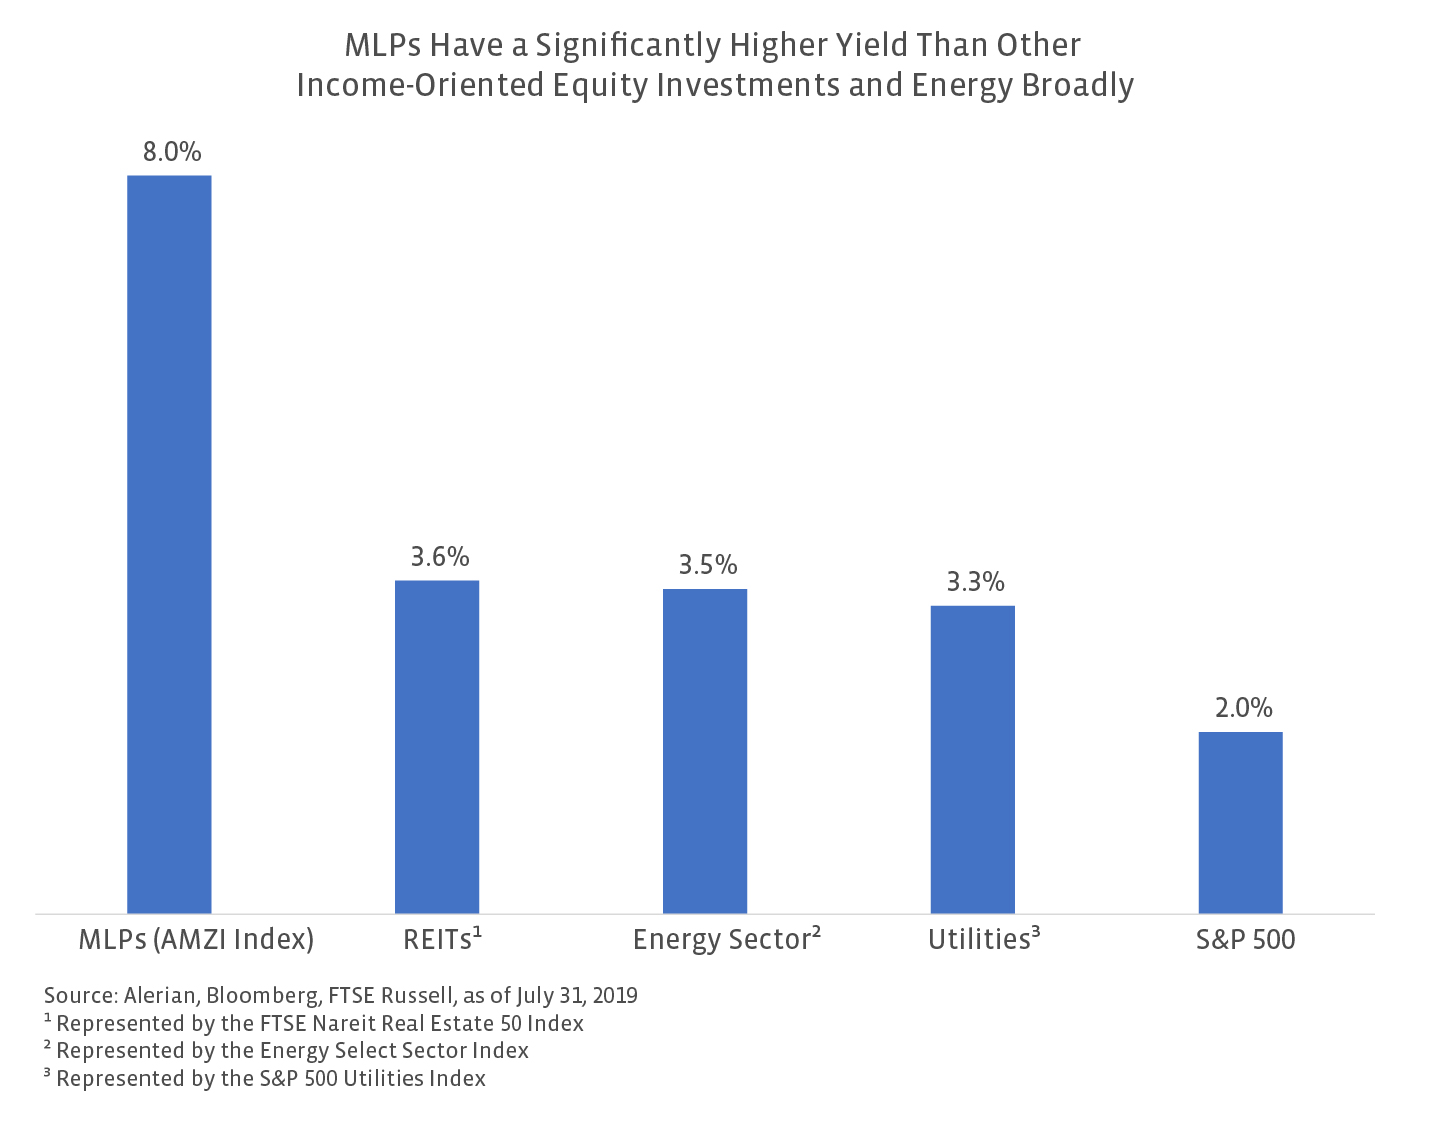 MLPs have higher yields